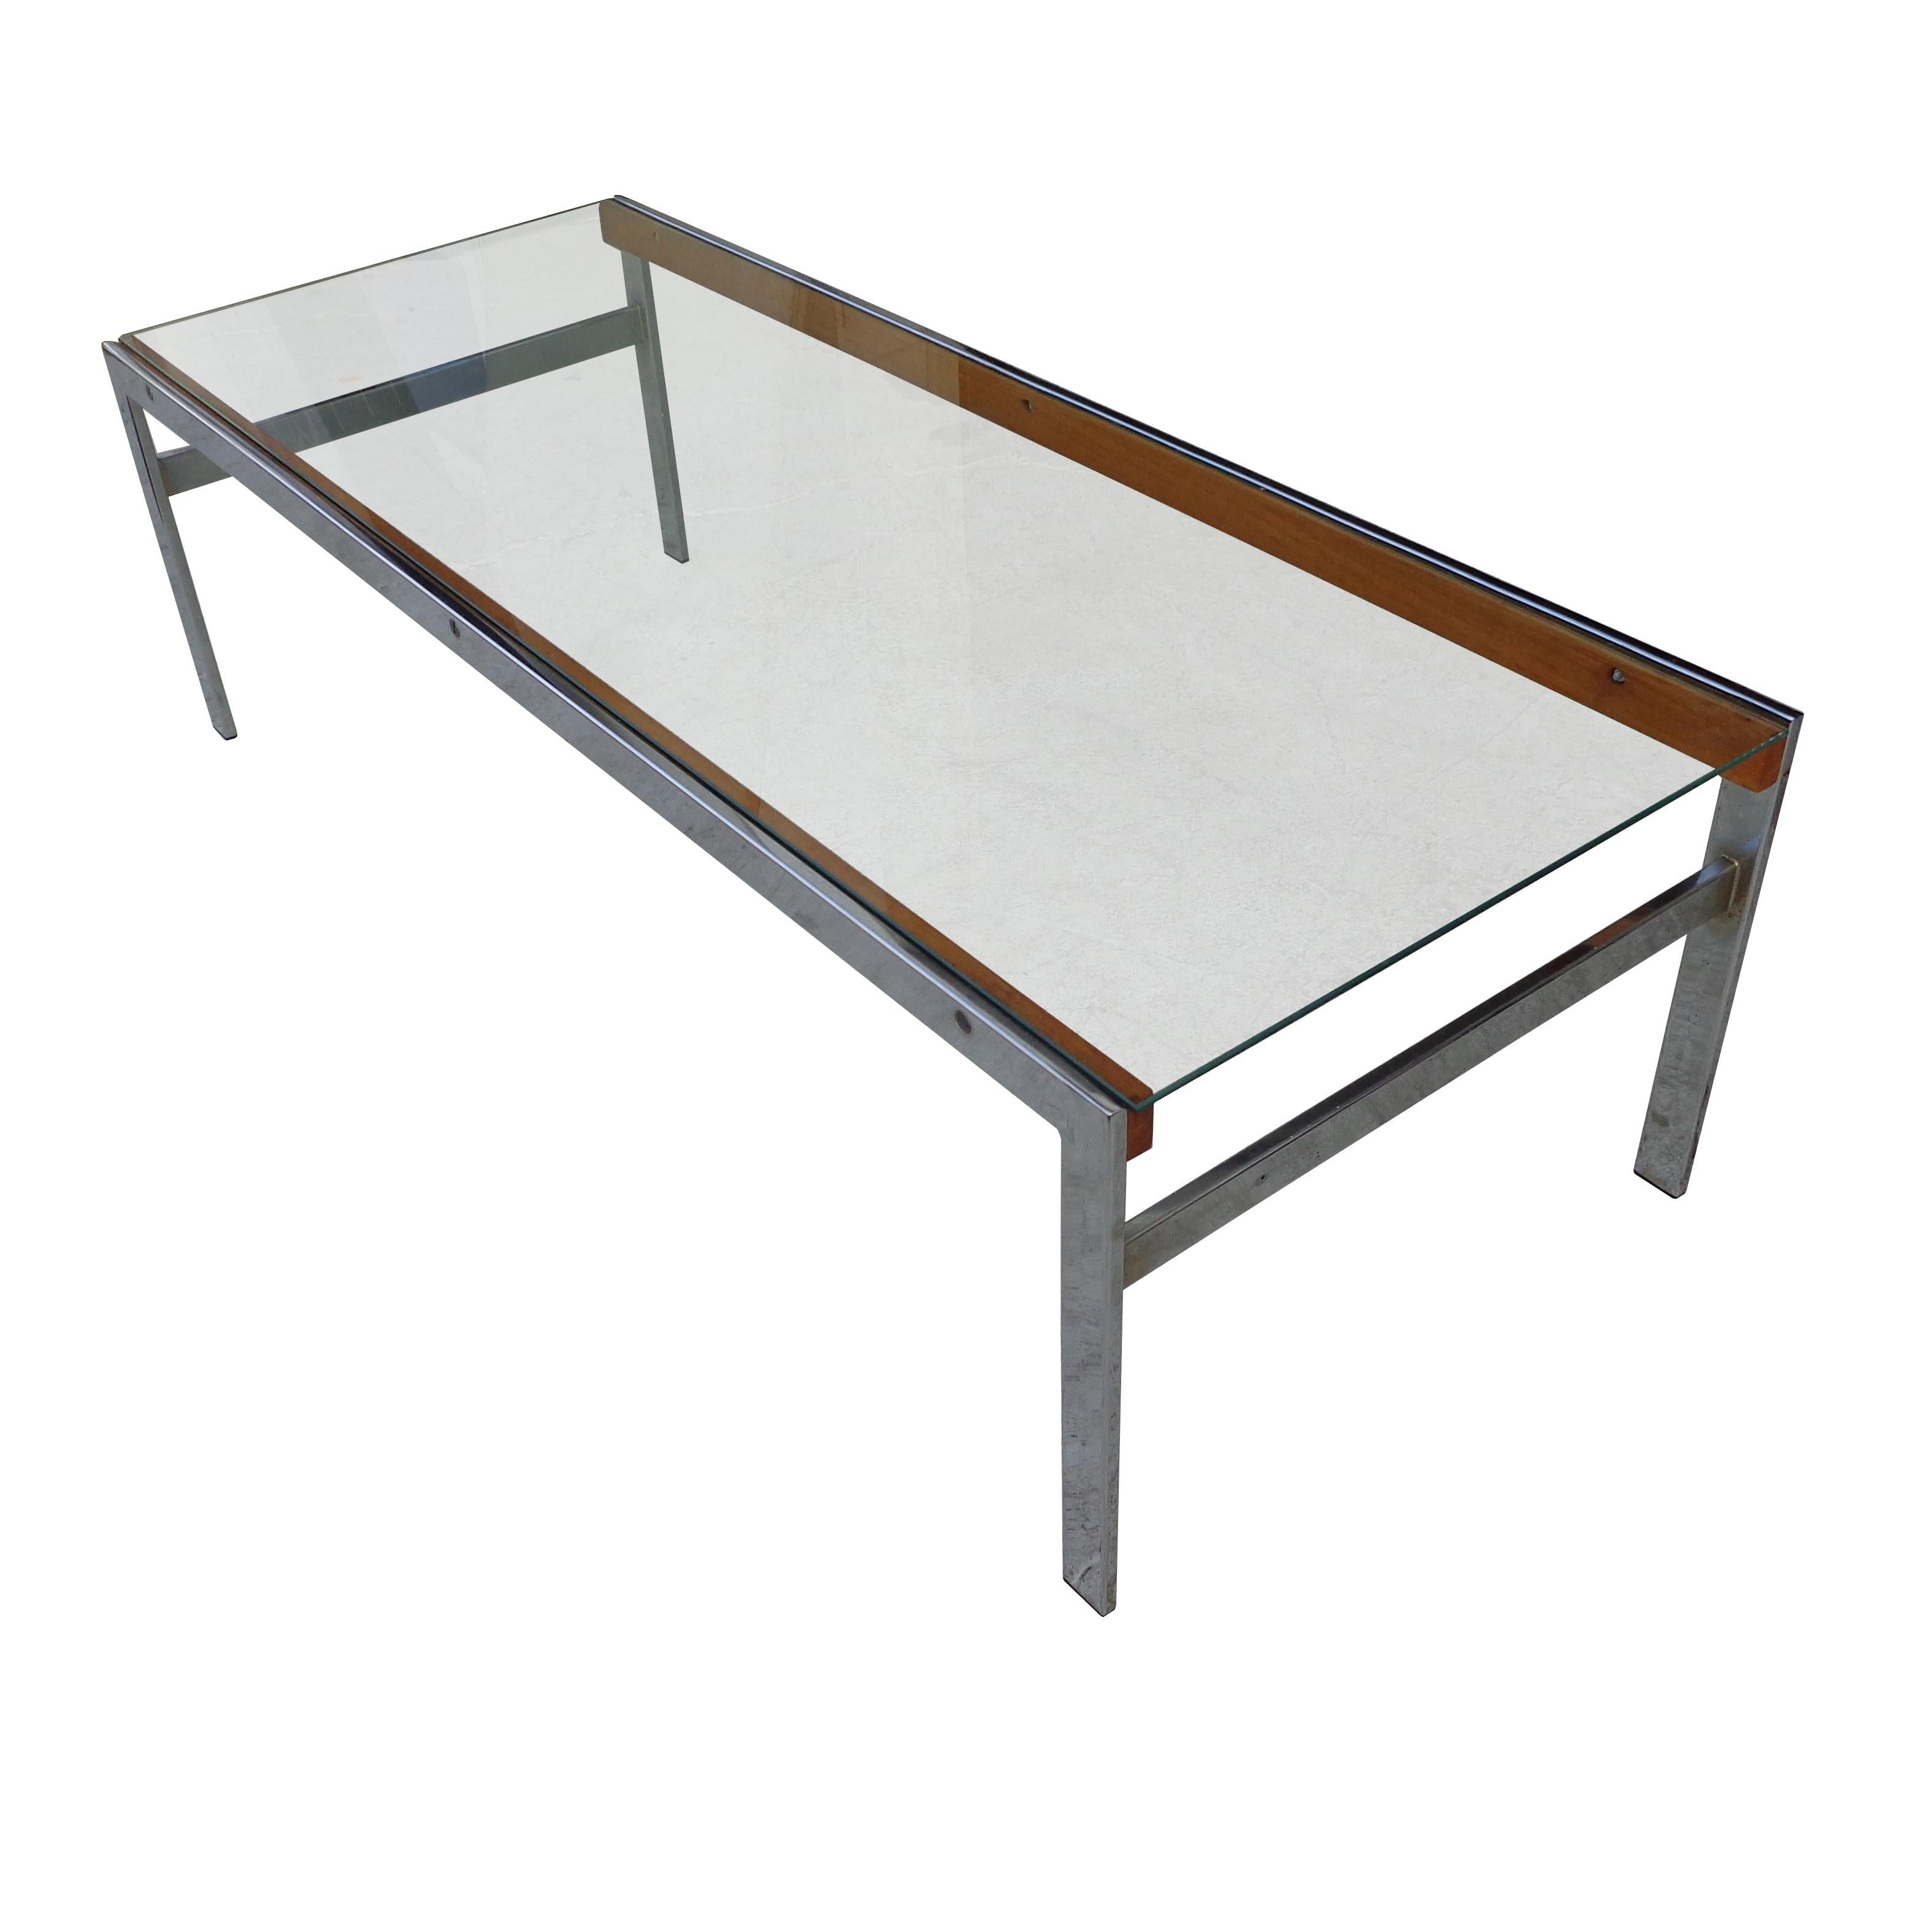 North American Mid Century Glass Top Chrome Wood Coffee Table For Sale